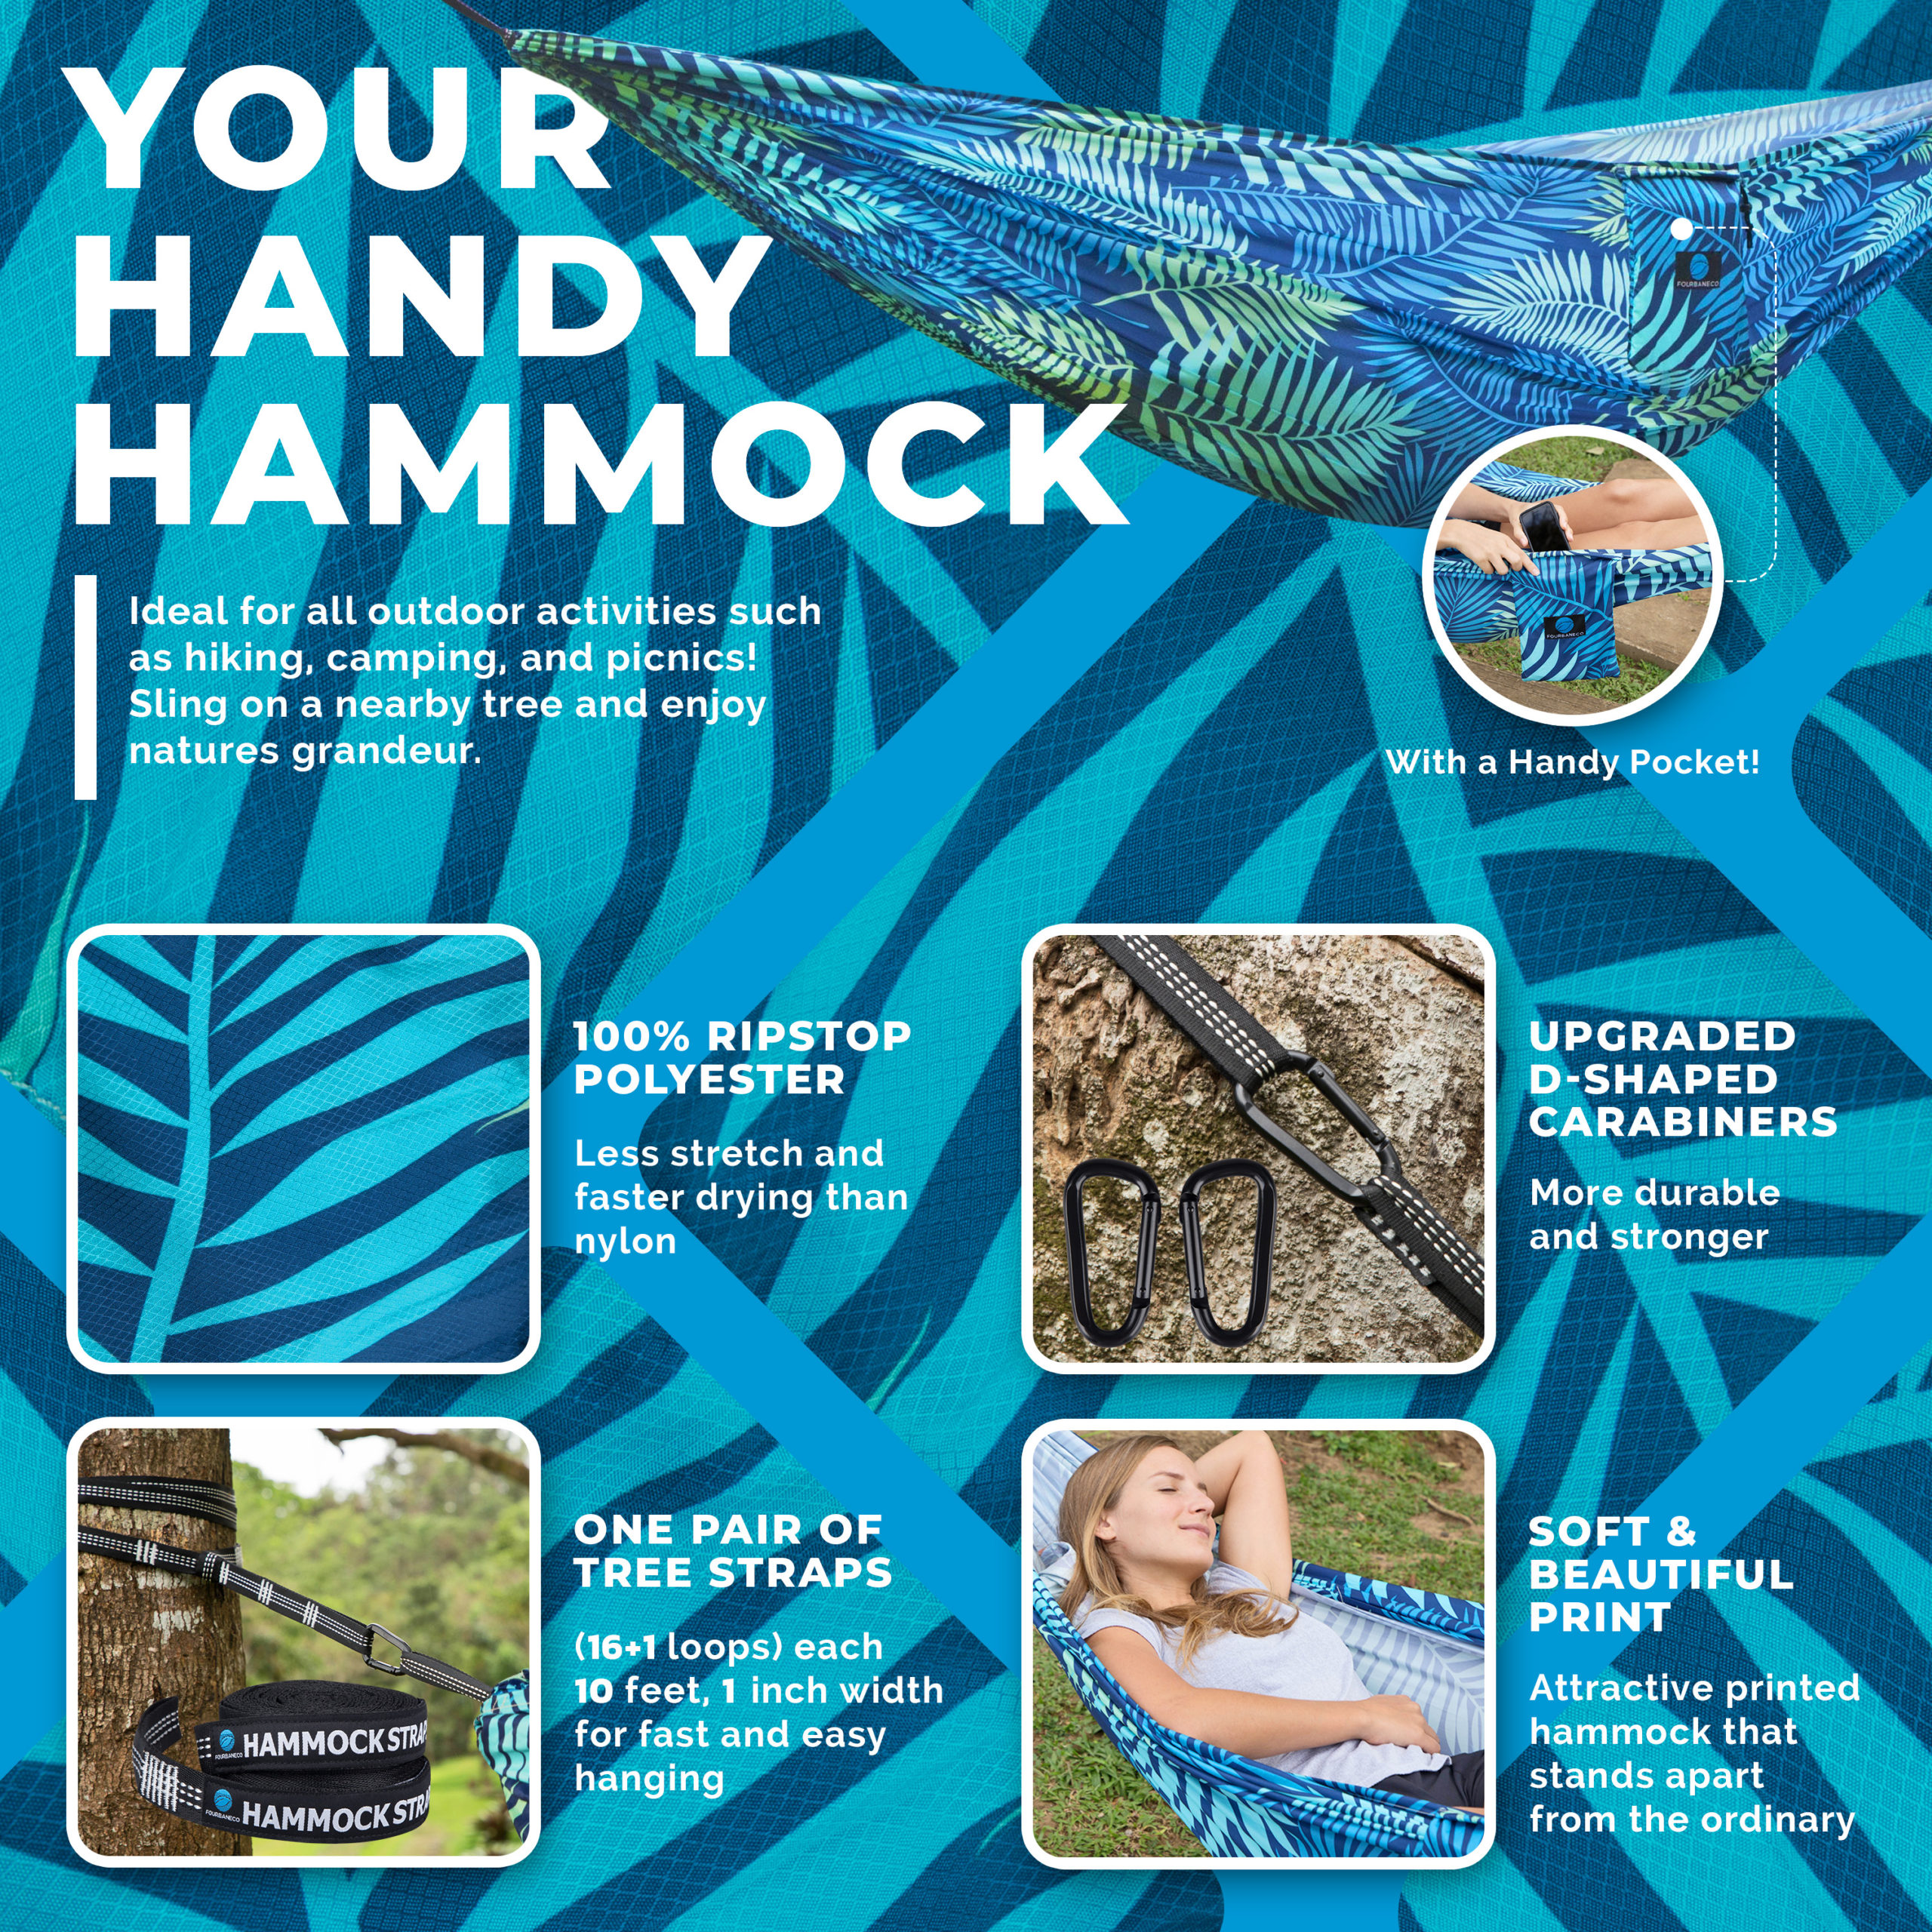 Fourbaneco Serene Blue Double Hammocks Hiking, – Products Travel with Outdoor, 2 Printed – – Hammock Yard Gear, Tree for Beach, Camping Backpacking, Indoor, Garden, UrbanEco Portable Size Porch Carabiners Travel, Straps, Lightweight